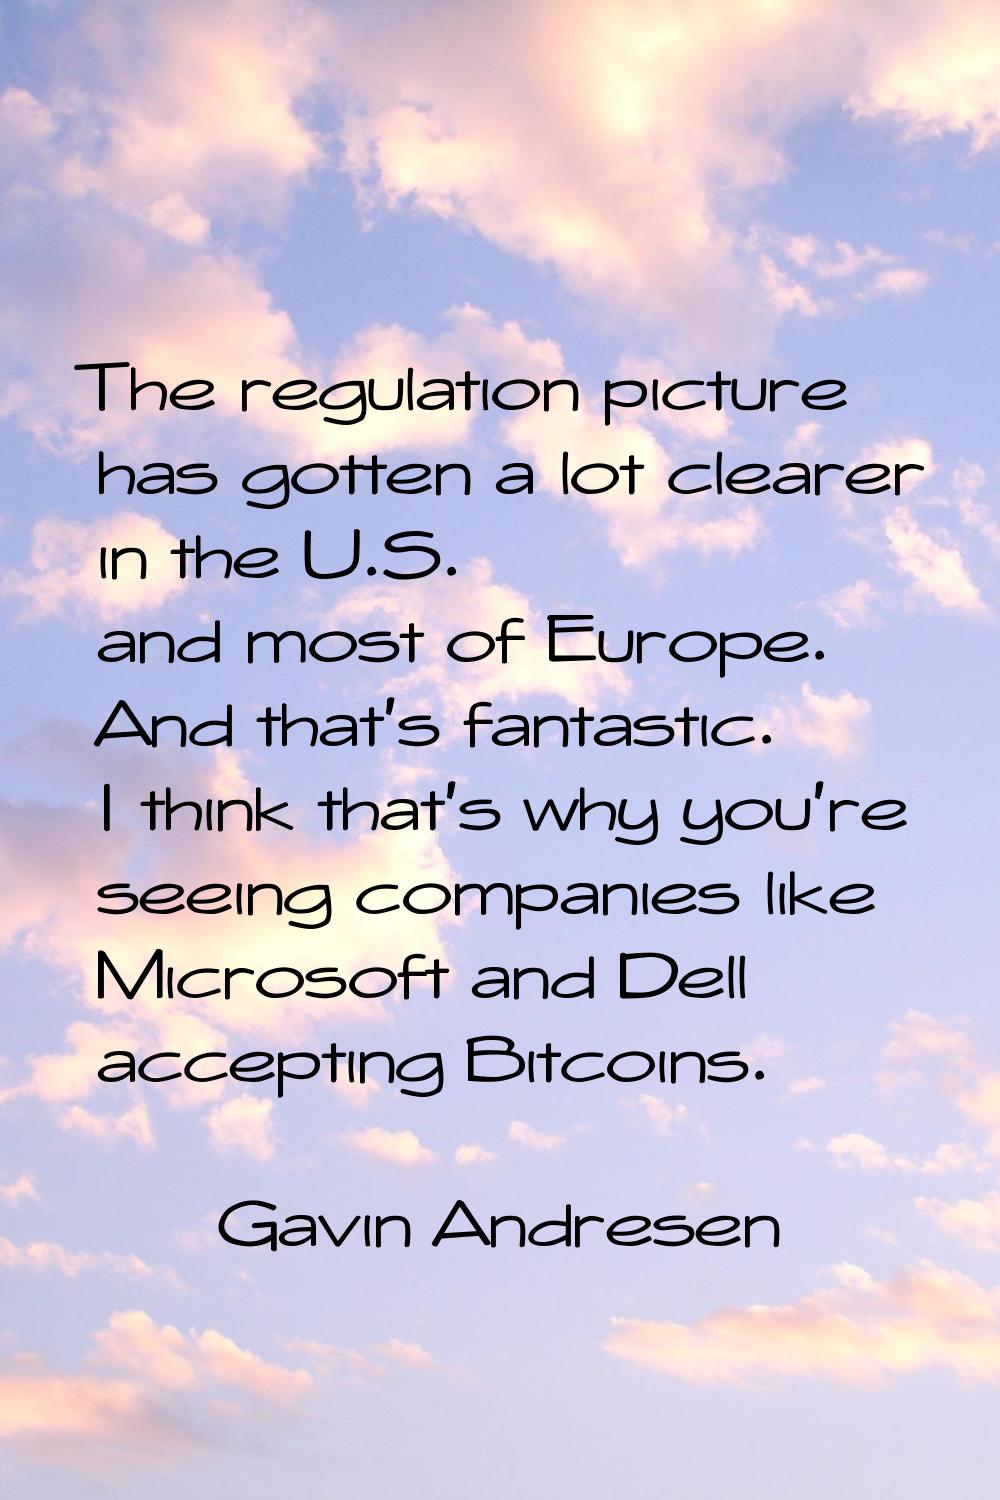 The regulation picture has gotten a lot clearer in the U.S. and most of Europe. And that's fantasti